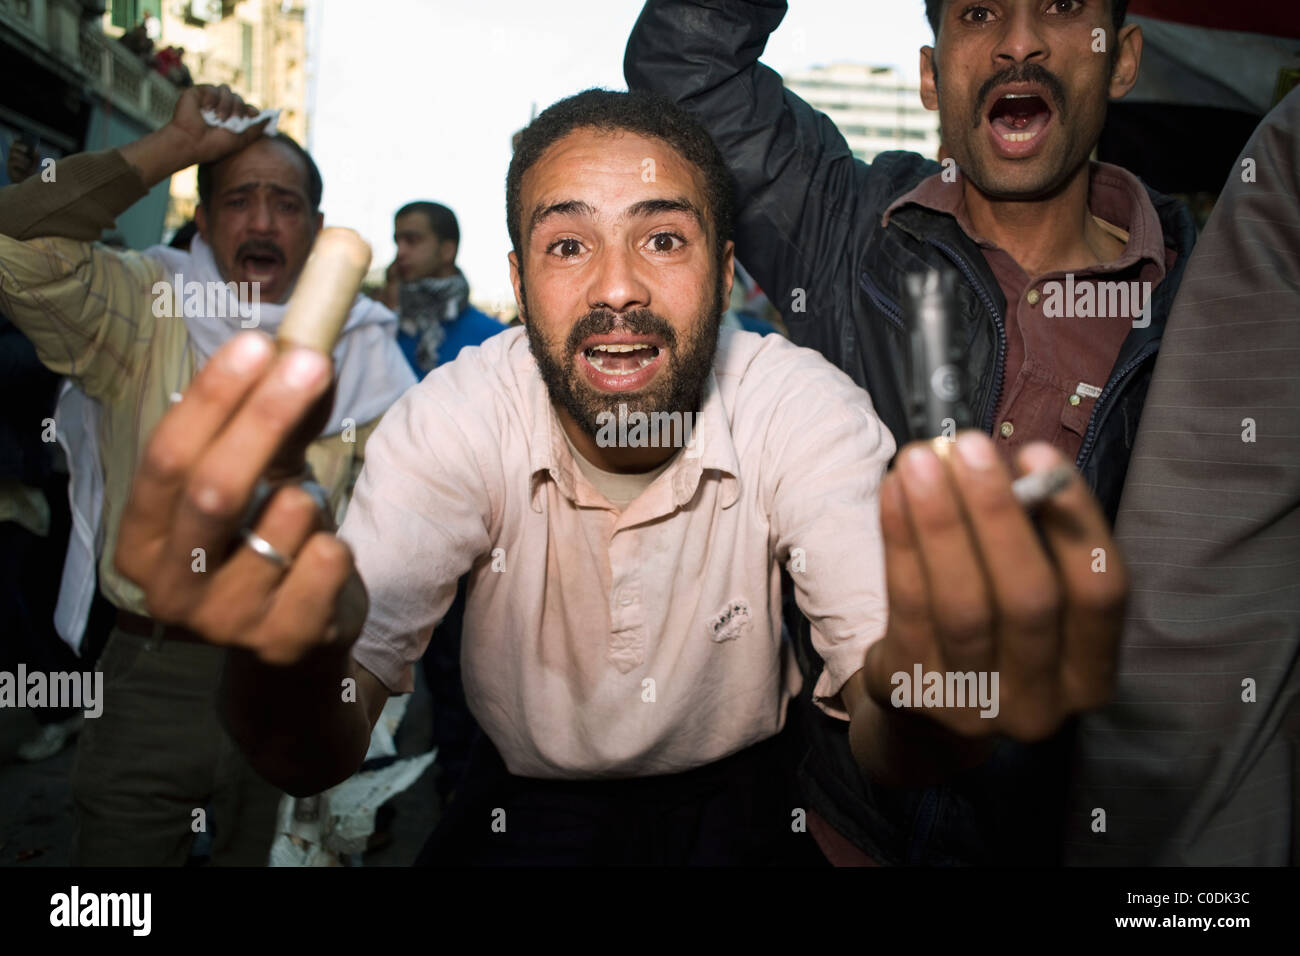 An anti-government protester holds up expended ammunition used by riot police in downtown Cairo, Egypt on Jan.28, 2011 Stock Photo